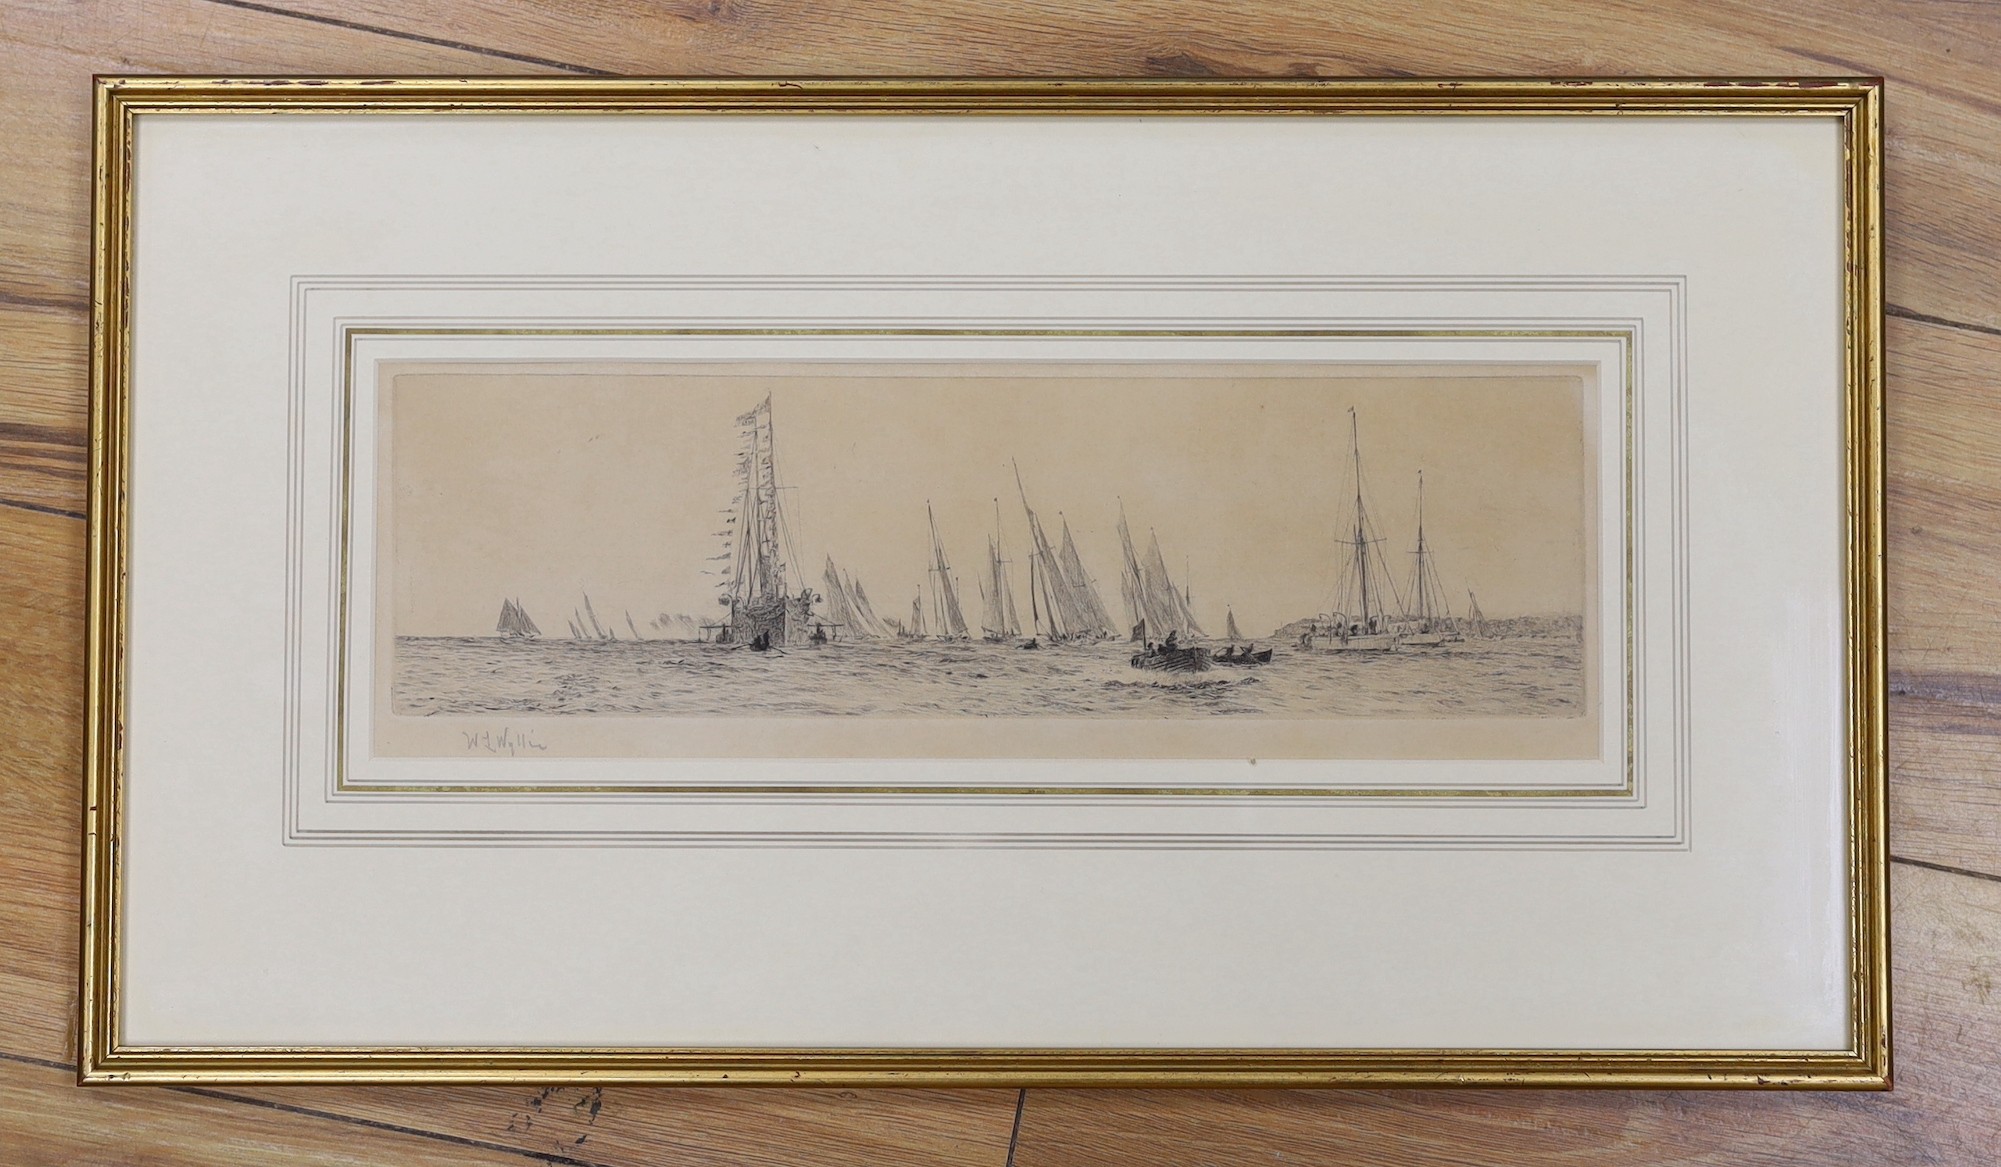 William Lionel Wyllie (1851-1931), drypoint etching, 'Cowes Week, The Royal Yacht dressed all over', signed in pencil, 12 x 36cm